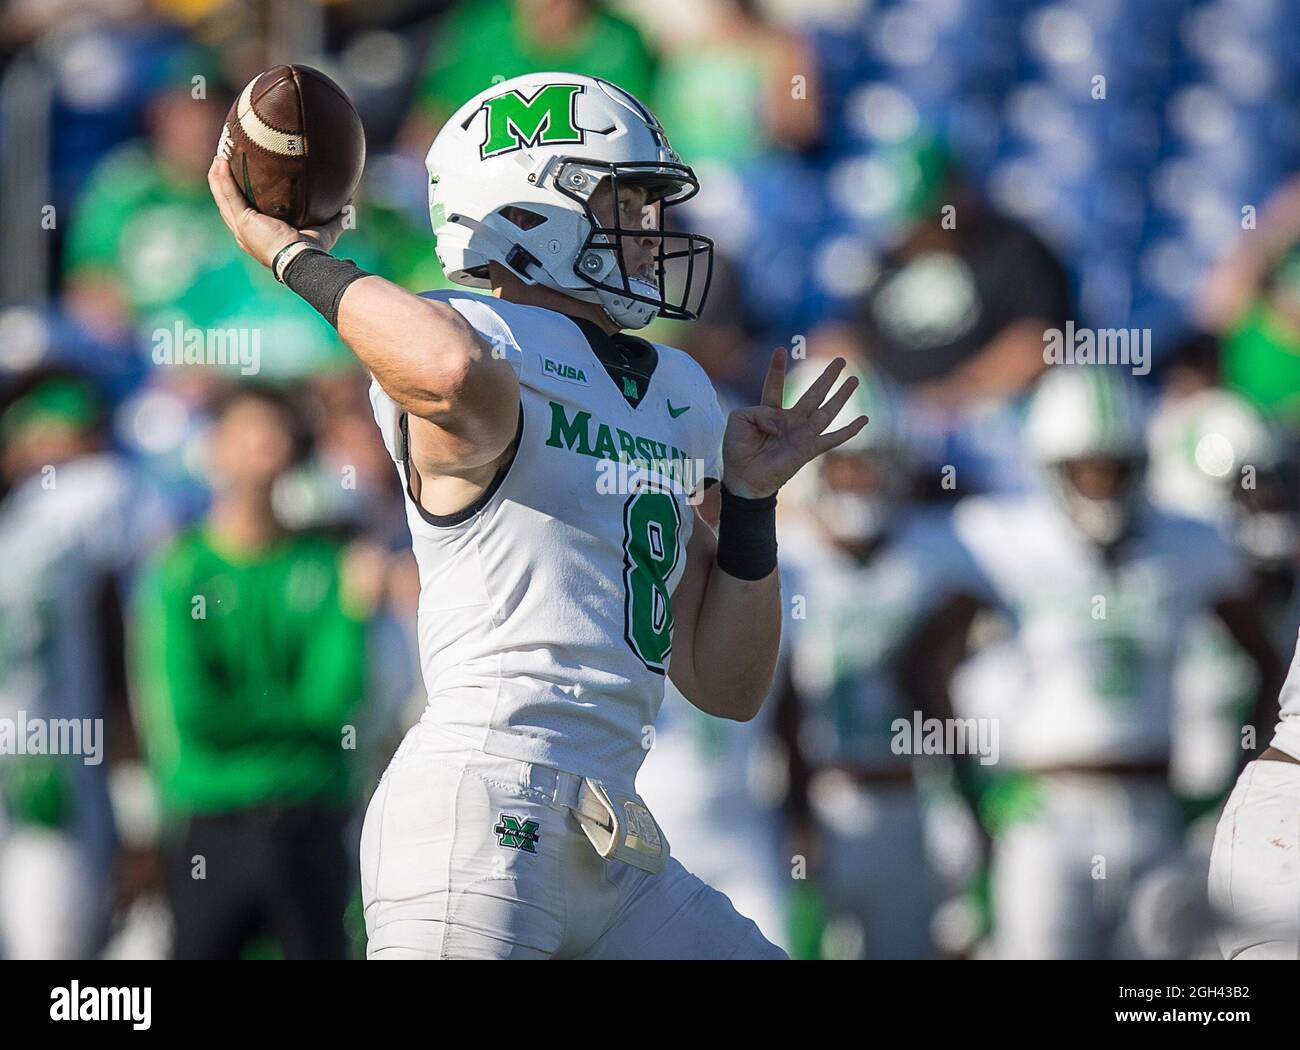 September 4, 2021: Marshall Thundering Herd quarterback Grant Wells (8) throws the ball during the regular season opening game between the Marshall Thundering Herd and the Navy Midshipmen at Navy-Marine Corps Memorial Stadium in Annapolis, Maryland Photographer: Cory Royster Stock Photo